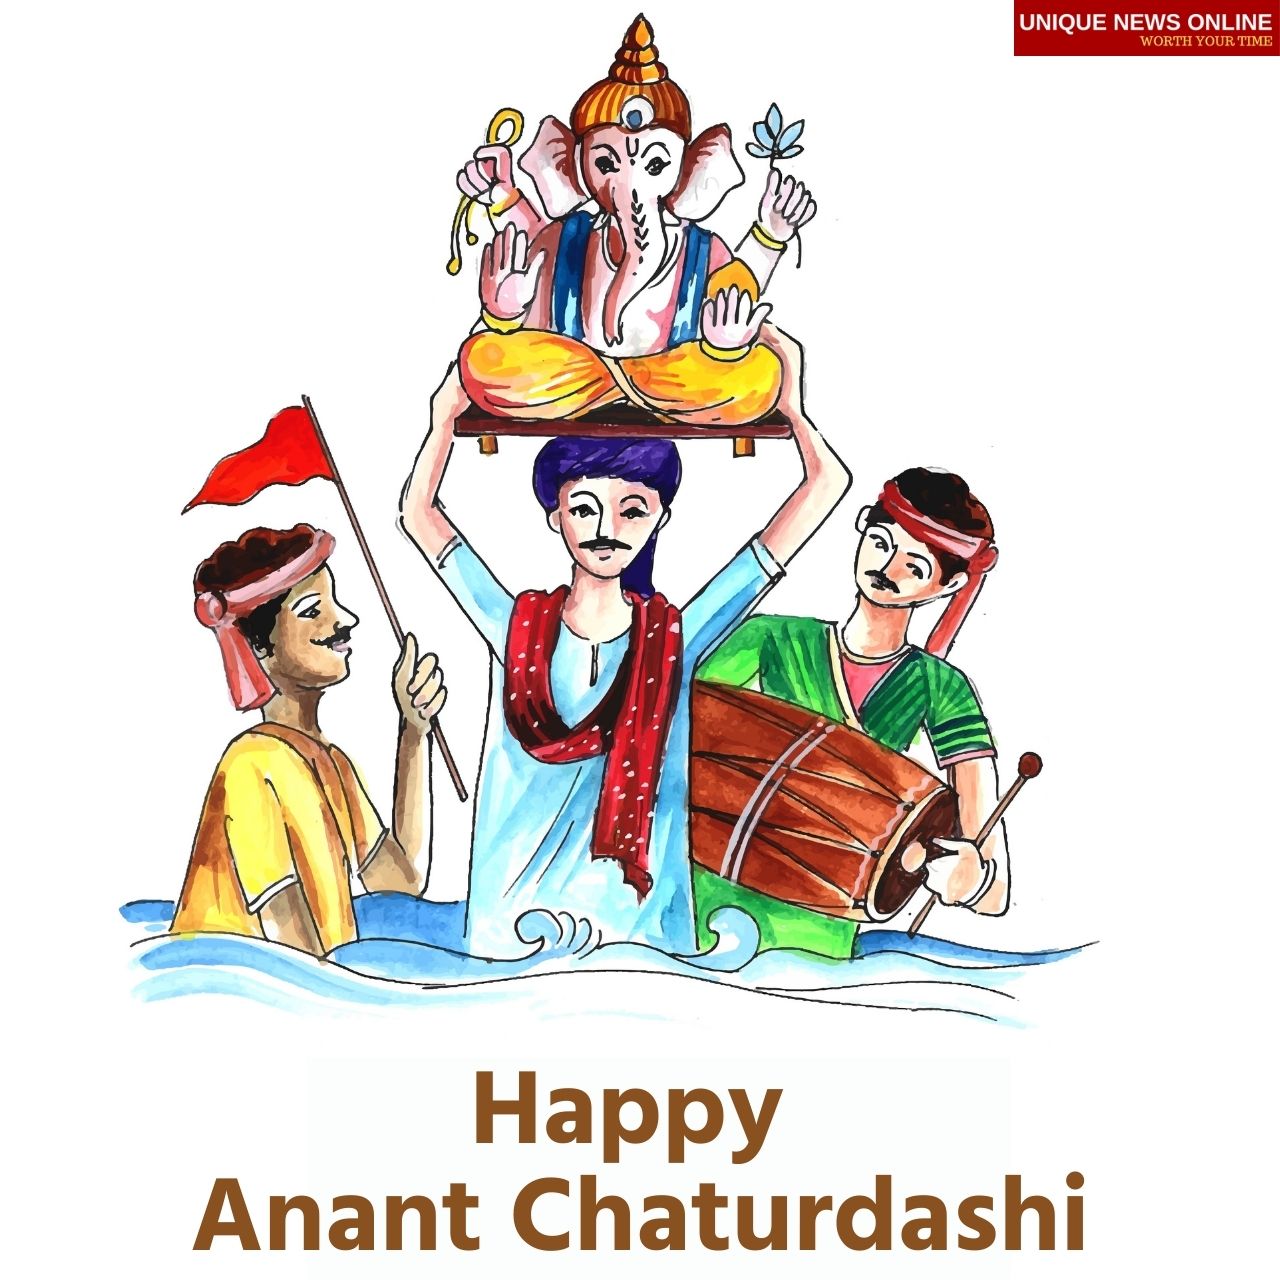 Happy Anant Chaturdashi 2021 Wishes, Images, Quotes, Status, Shayari, and Messages to Share